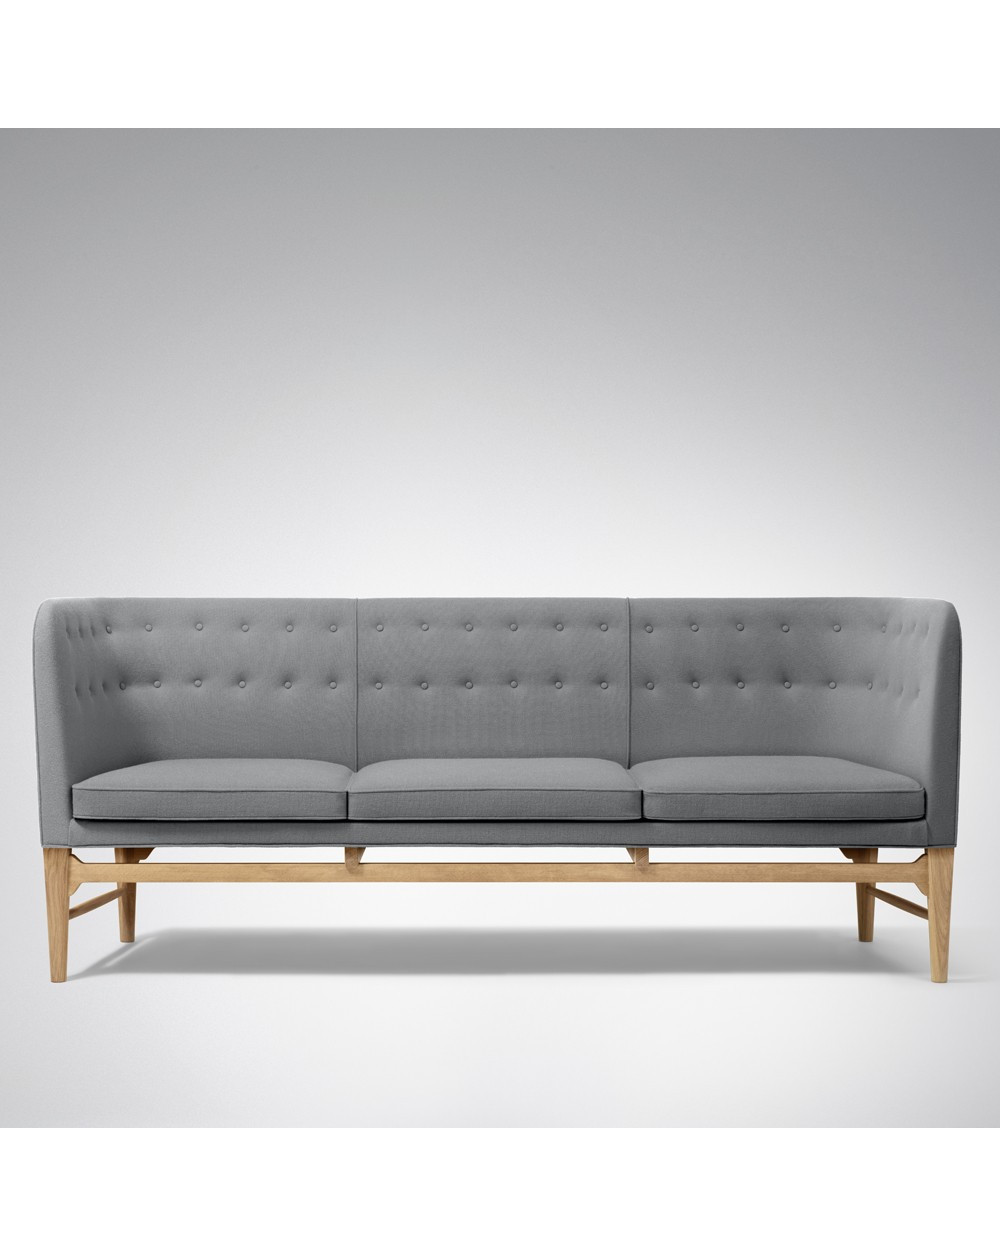 Sofa Mayor Designed By Arne Jacobsen, And Tradition Sofa